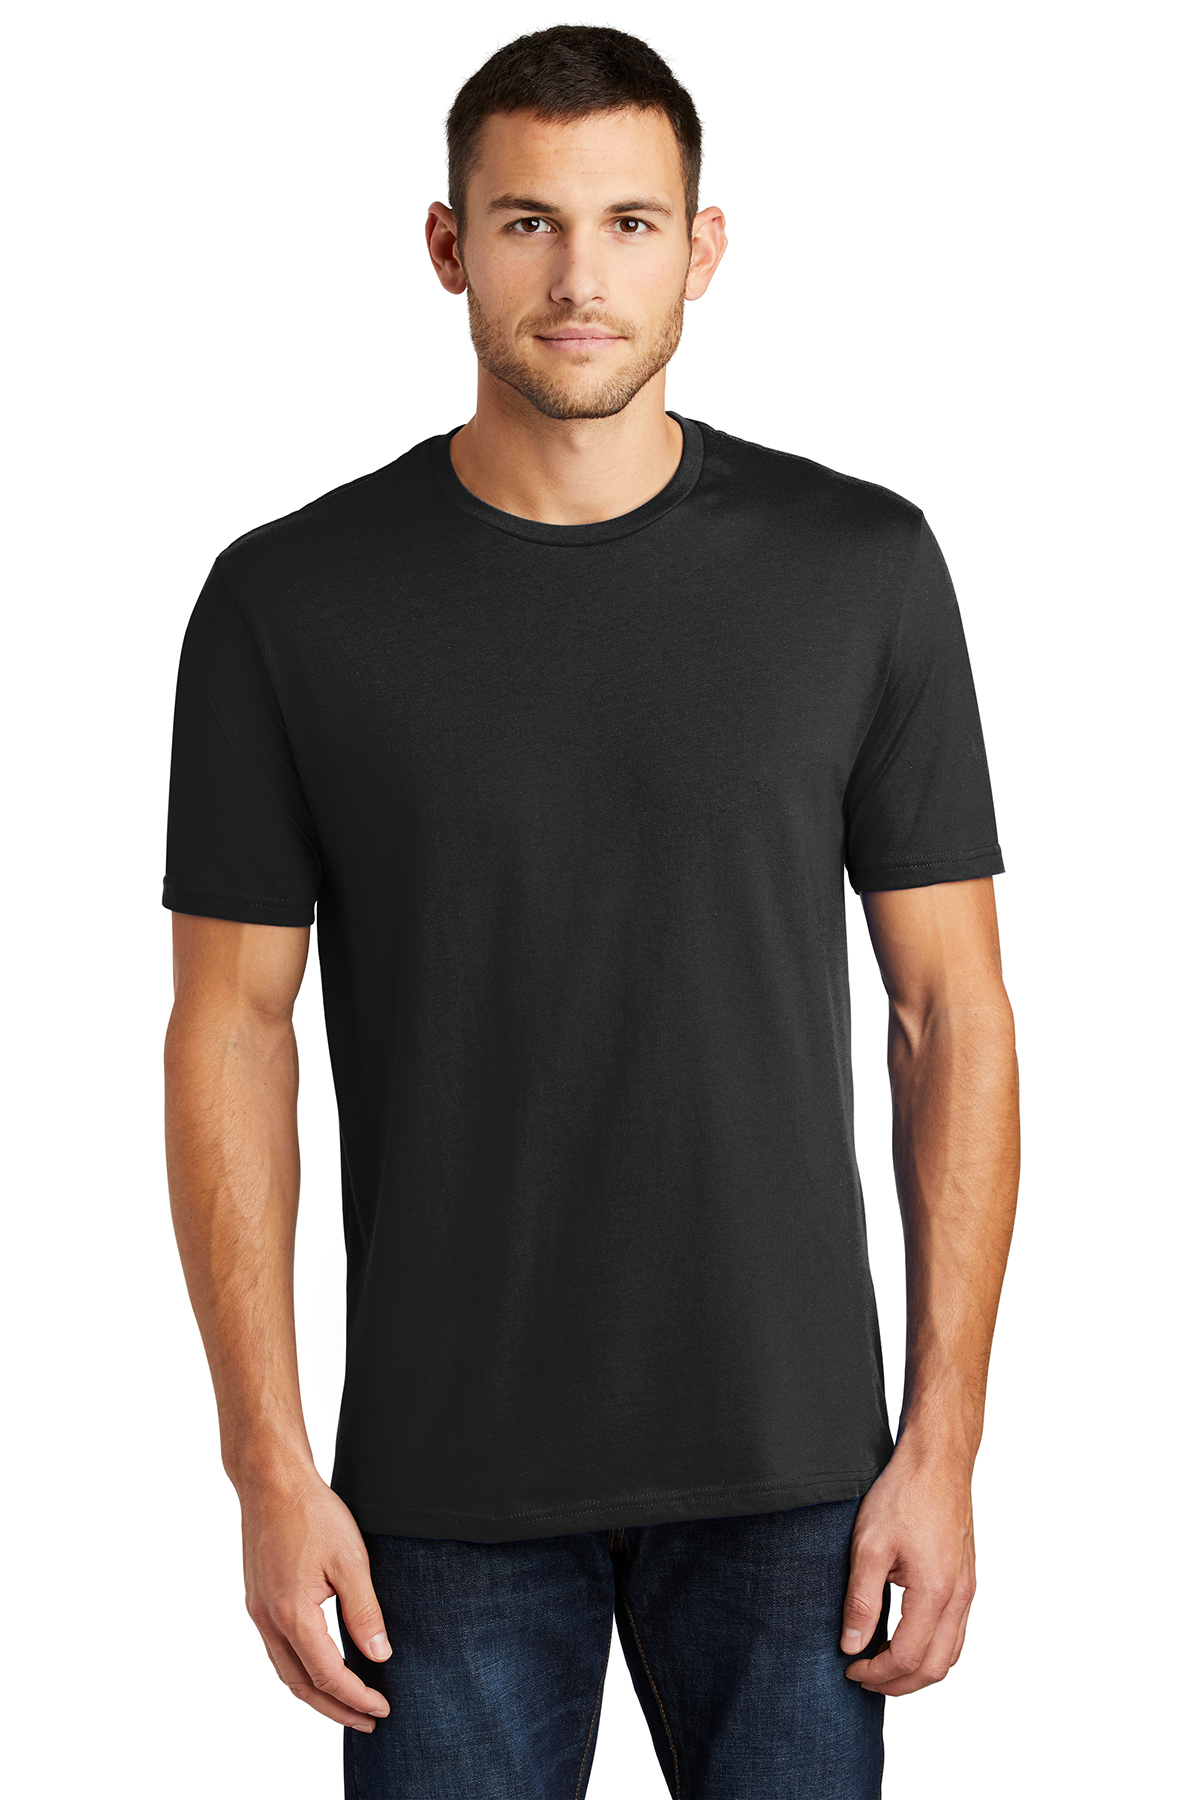     District Threads DT104 Mens Perfect Weight District Tee.